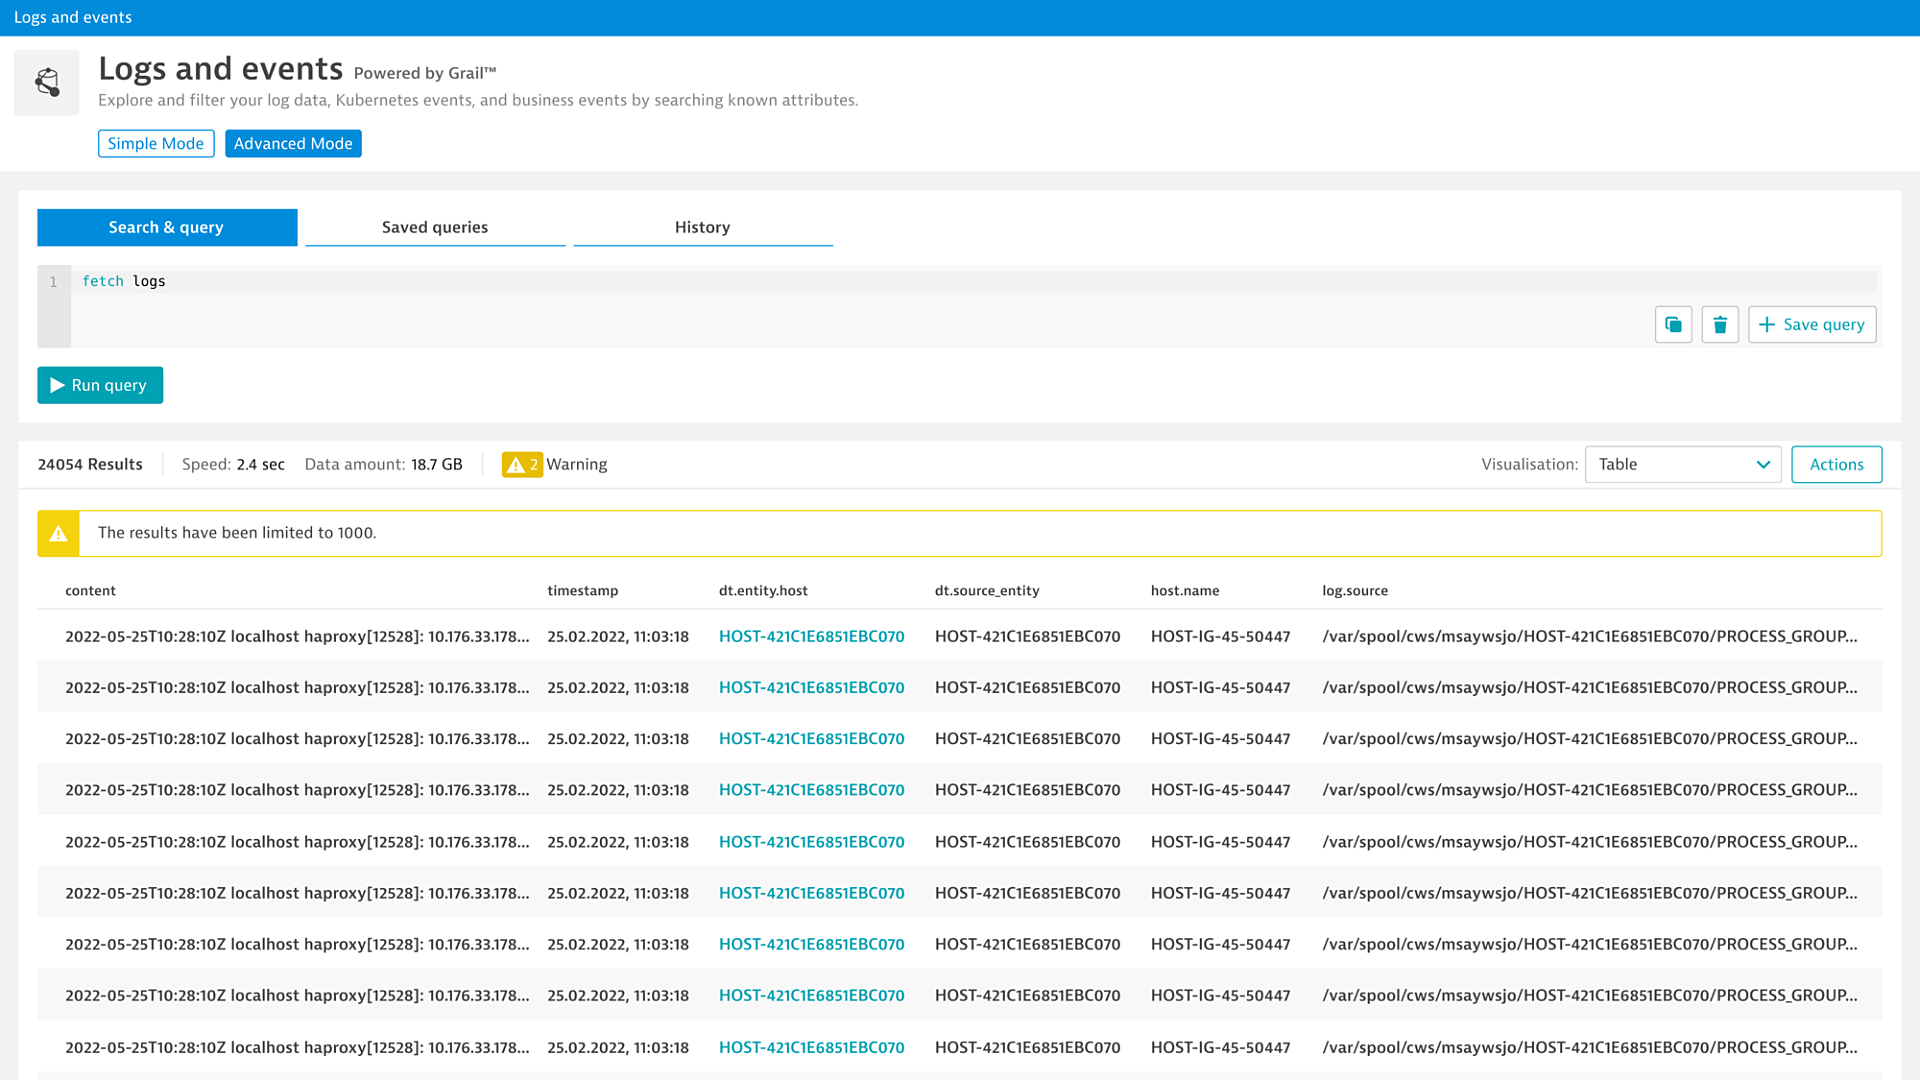 Log and events powered by Grail in Dynatrace screenshot